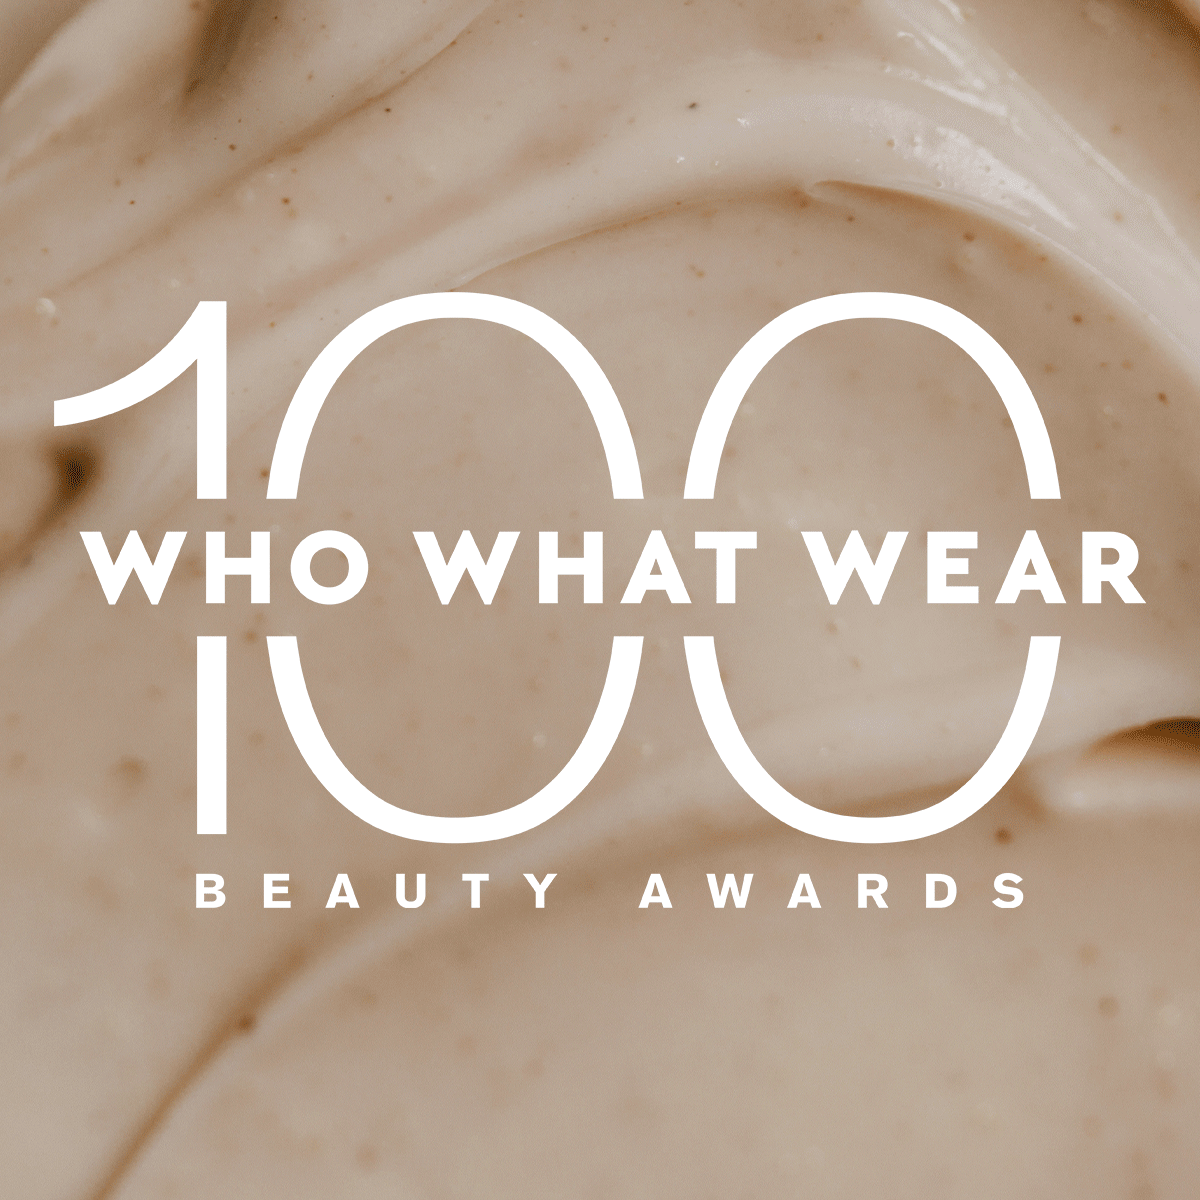 www-100-beauty-awards-submission-info-310368-1698943373006-main